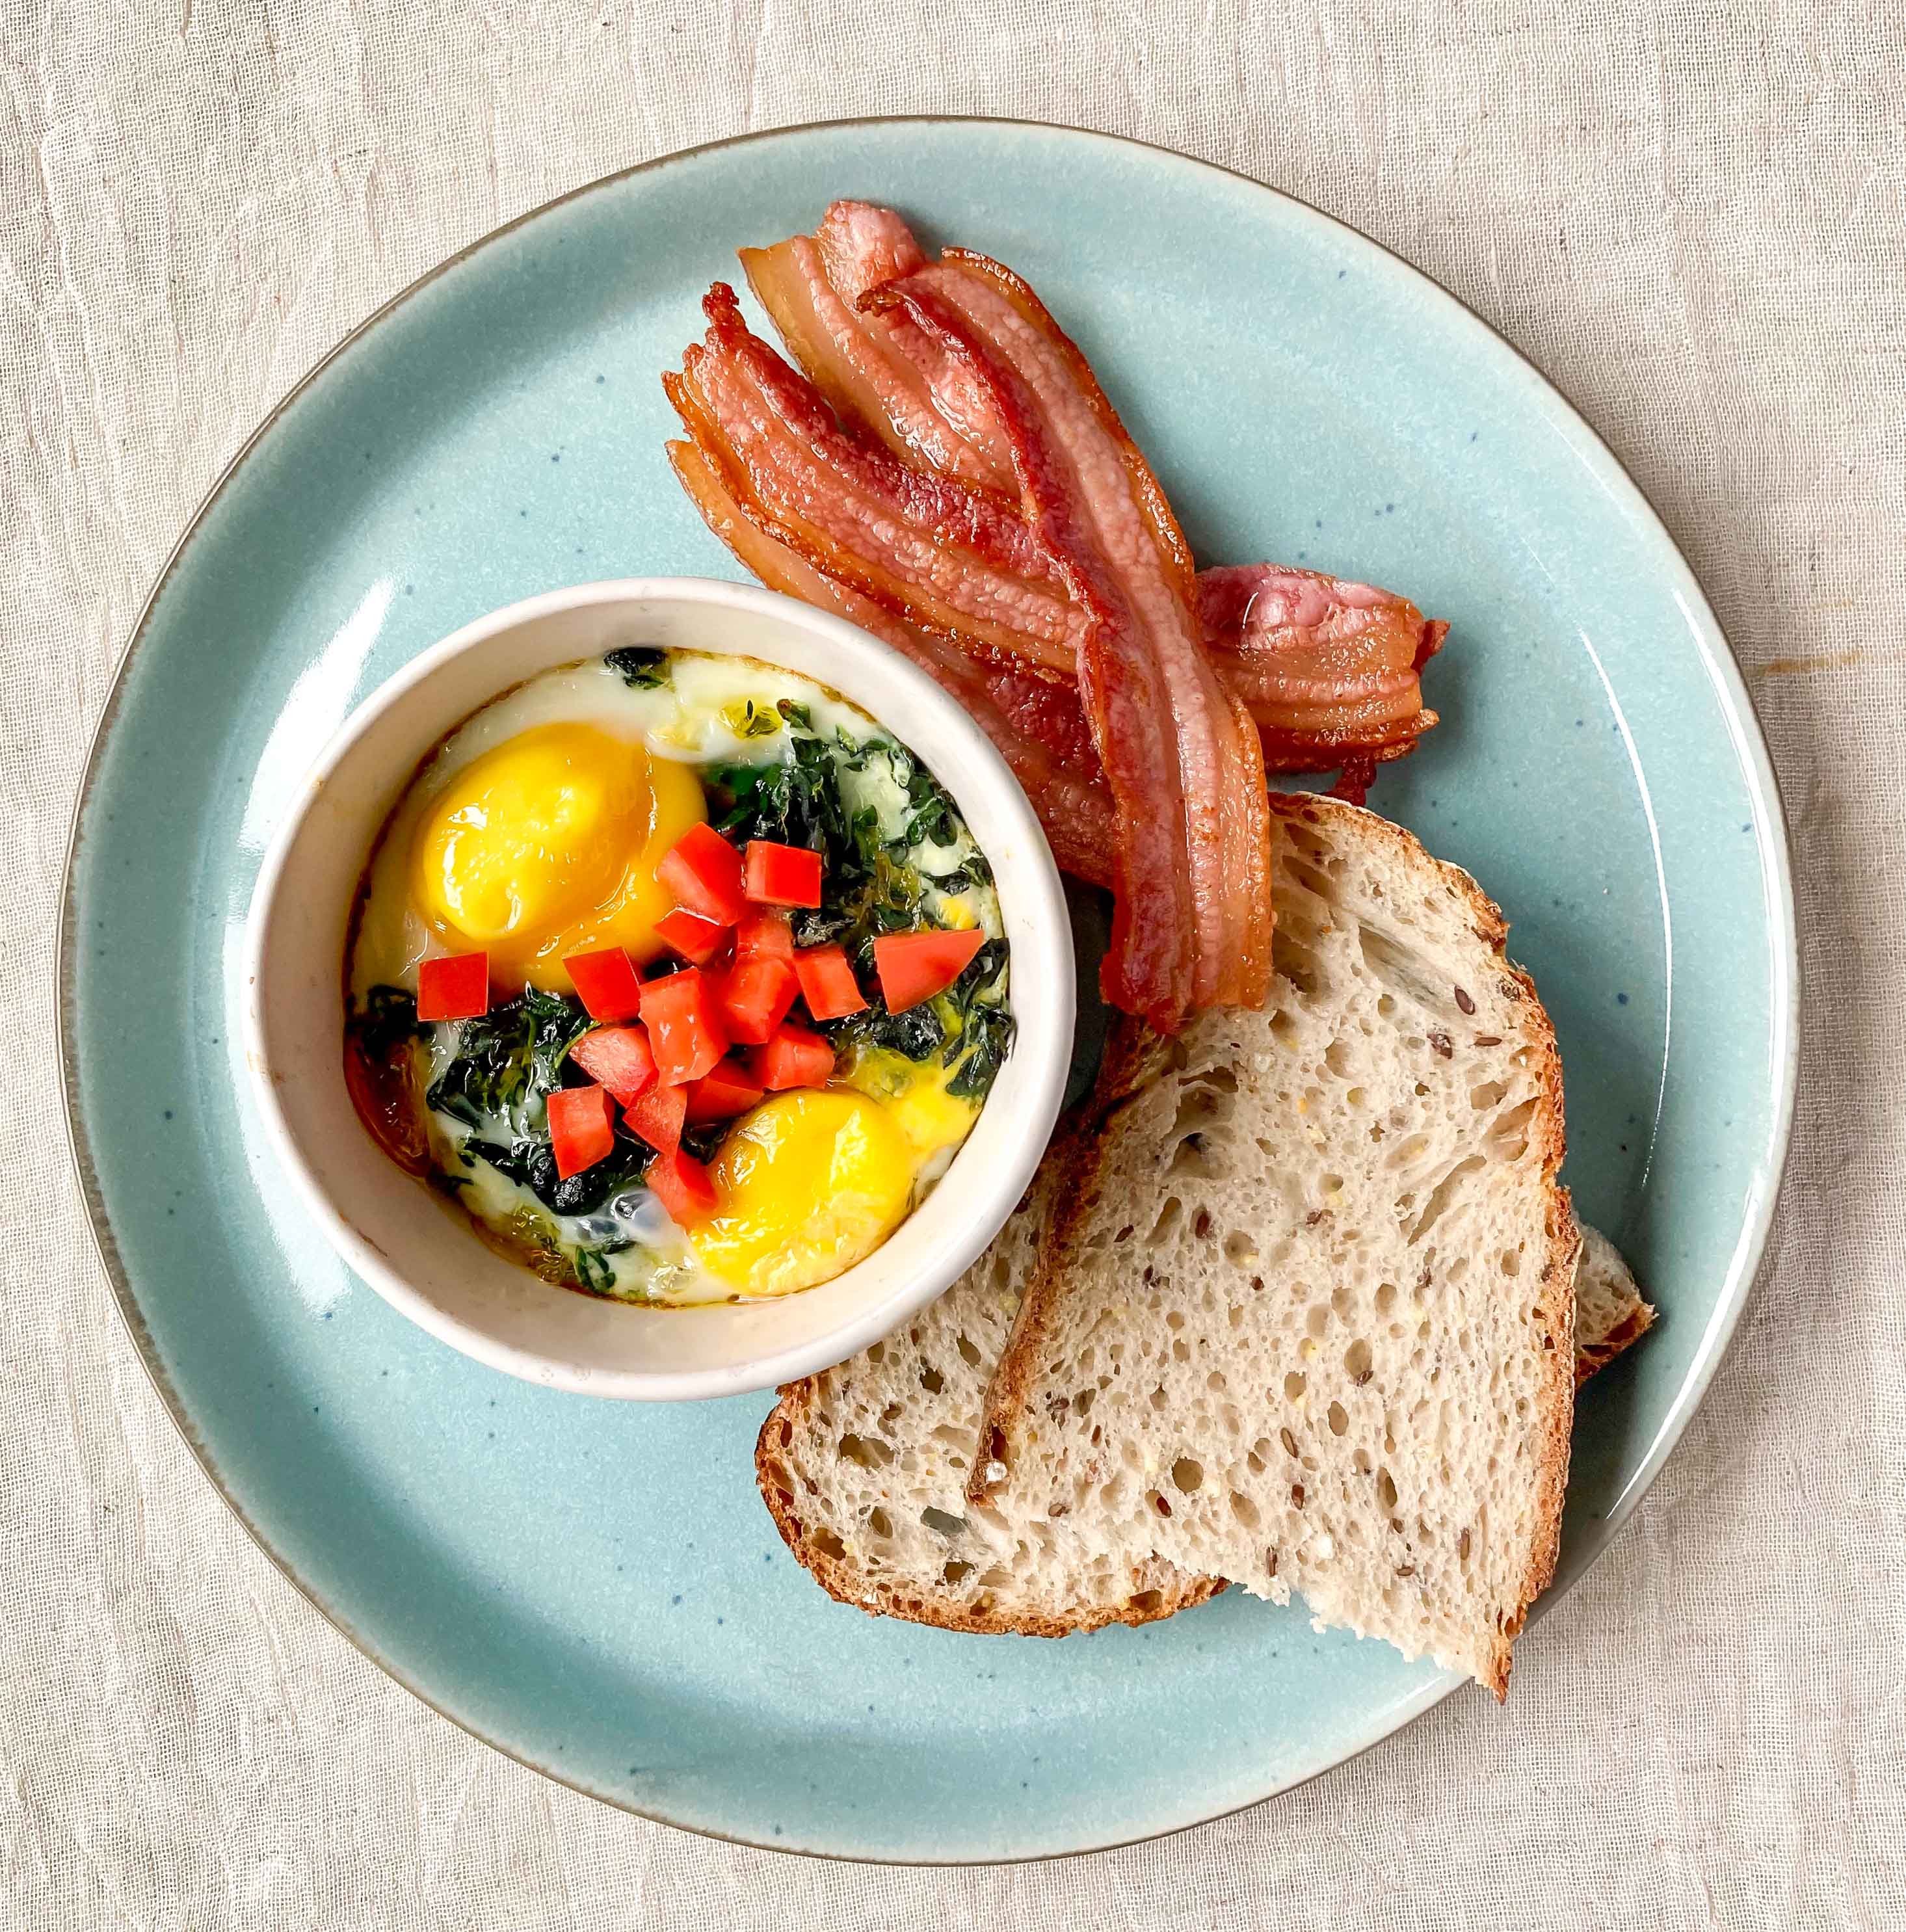 Baked eggs with tomato and kale